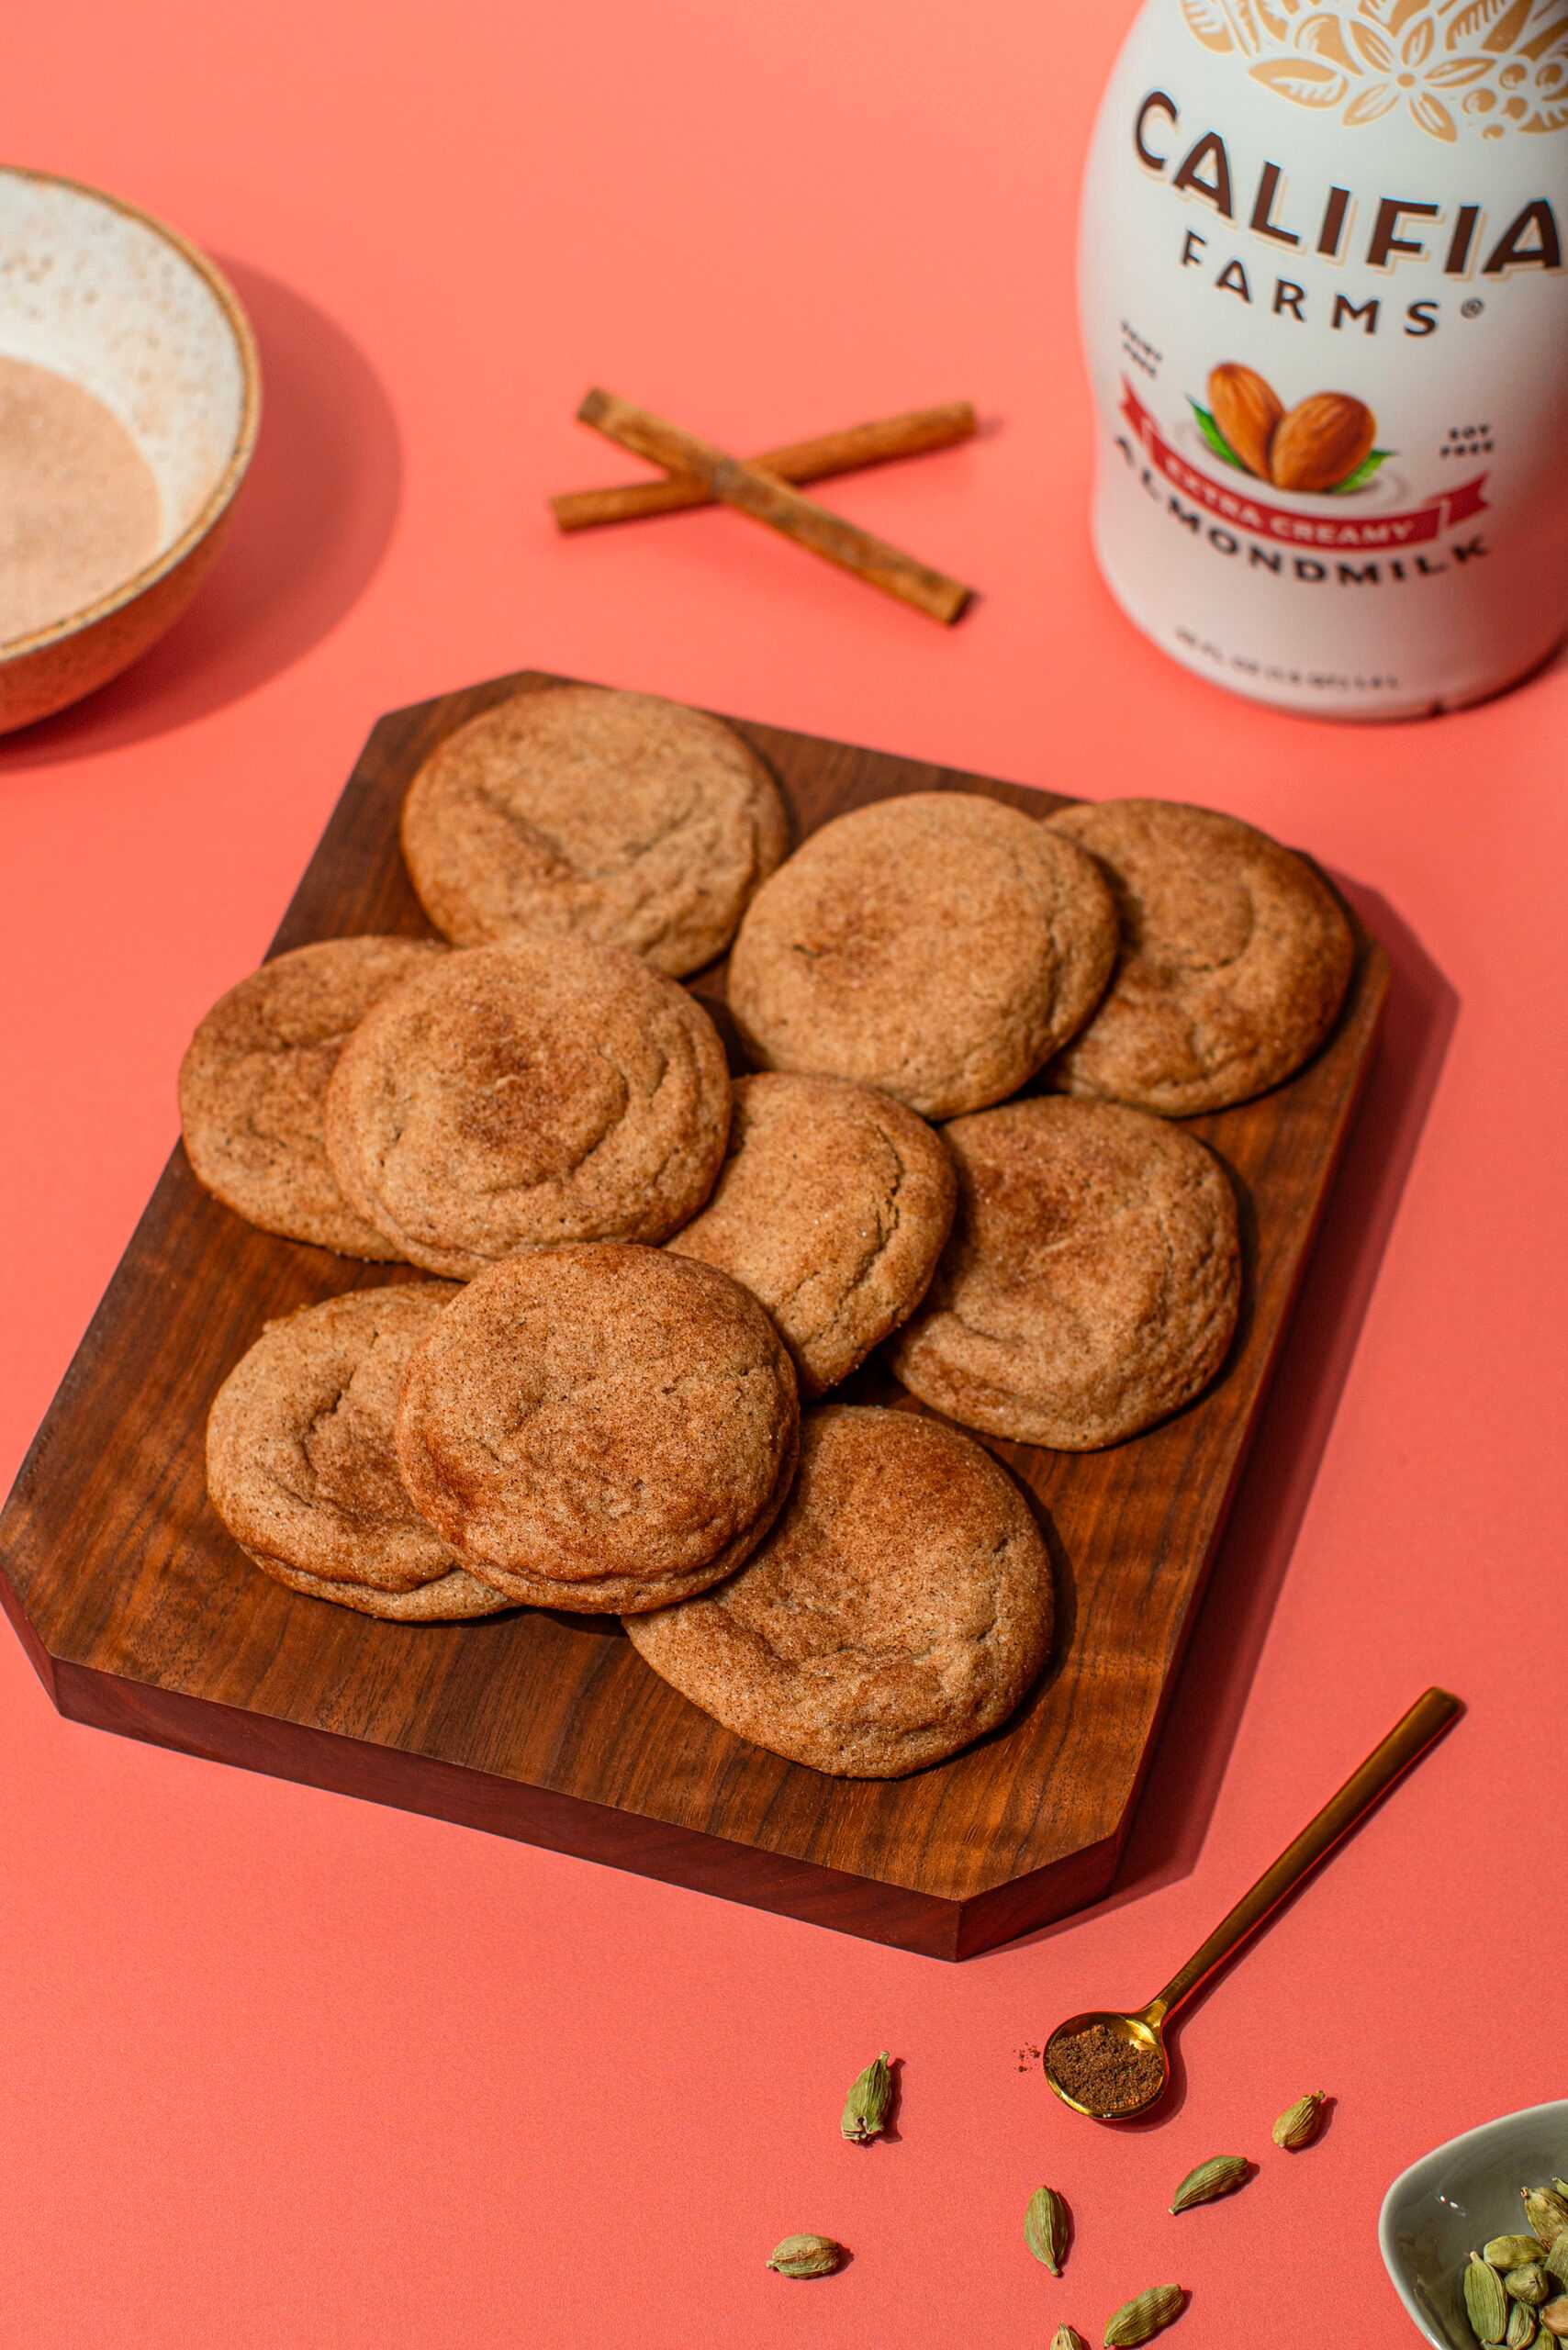 Chai cookies sit in the center of the image, with Califia Farms Extra Creamy Almondmilk behind.